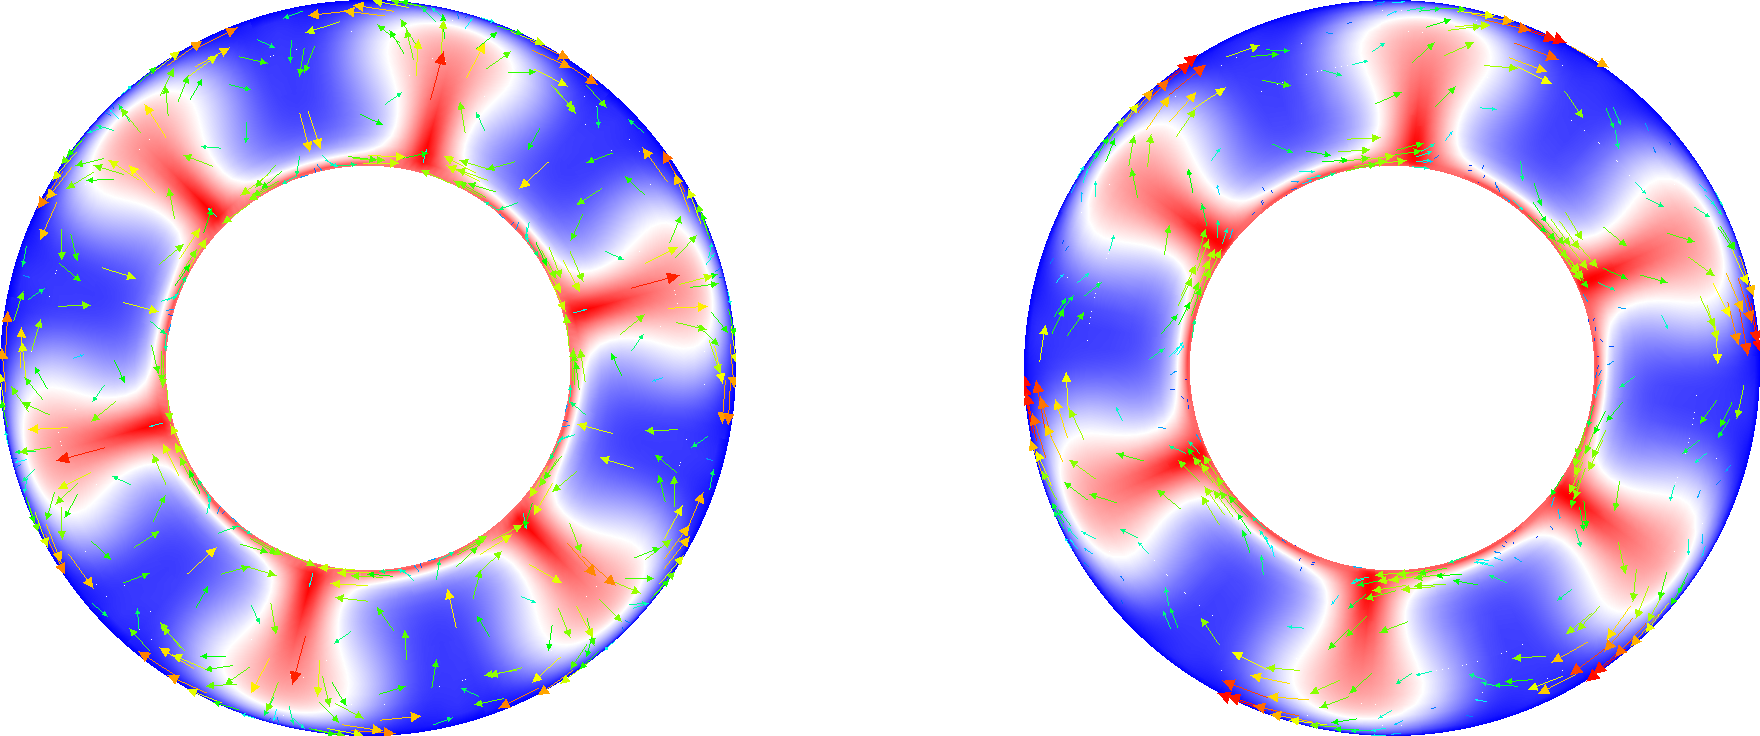 Example of nullspace removal. On the left the nullspace (a rigid rotation) is removed, and the velocity vectors accurately show the mantle flow. On the right there is a significant clockwise rotation to the velocity solution which is making the more interesting flow features difficult to see.